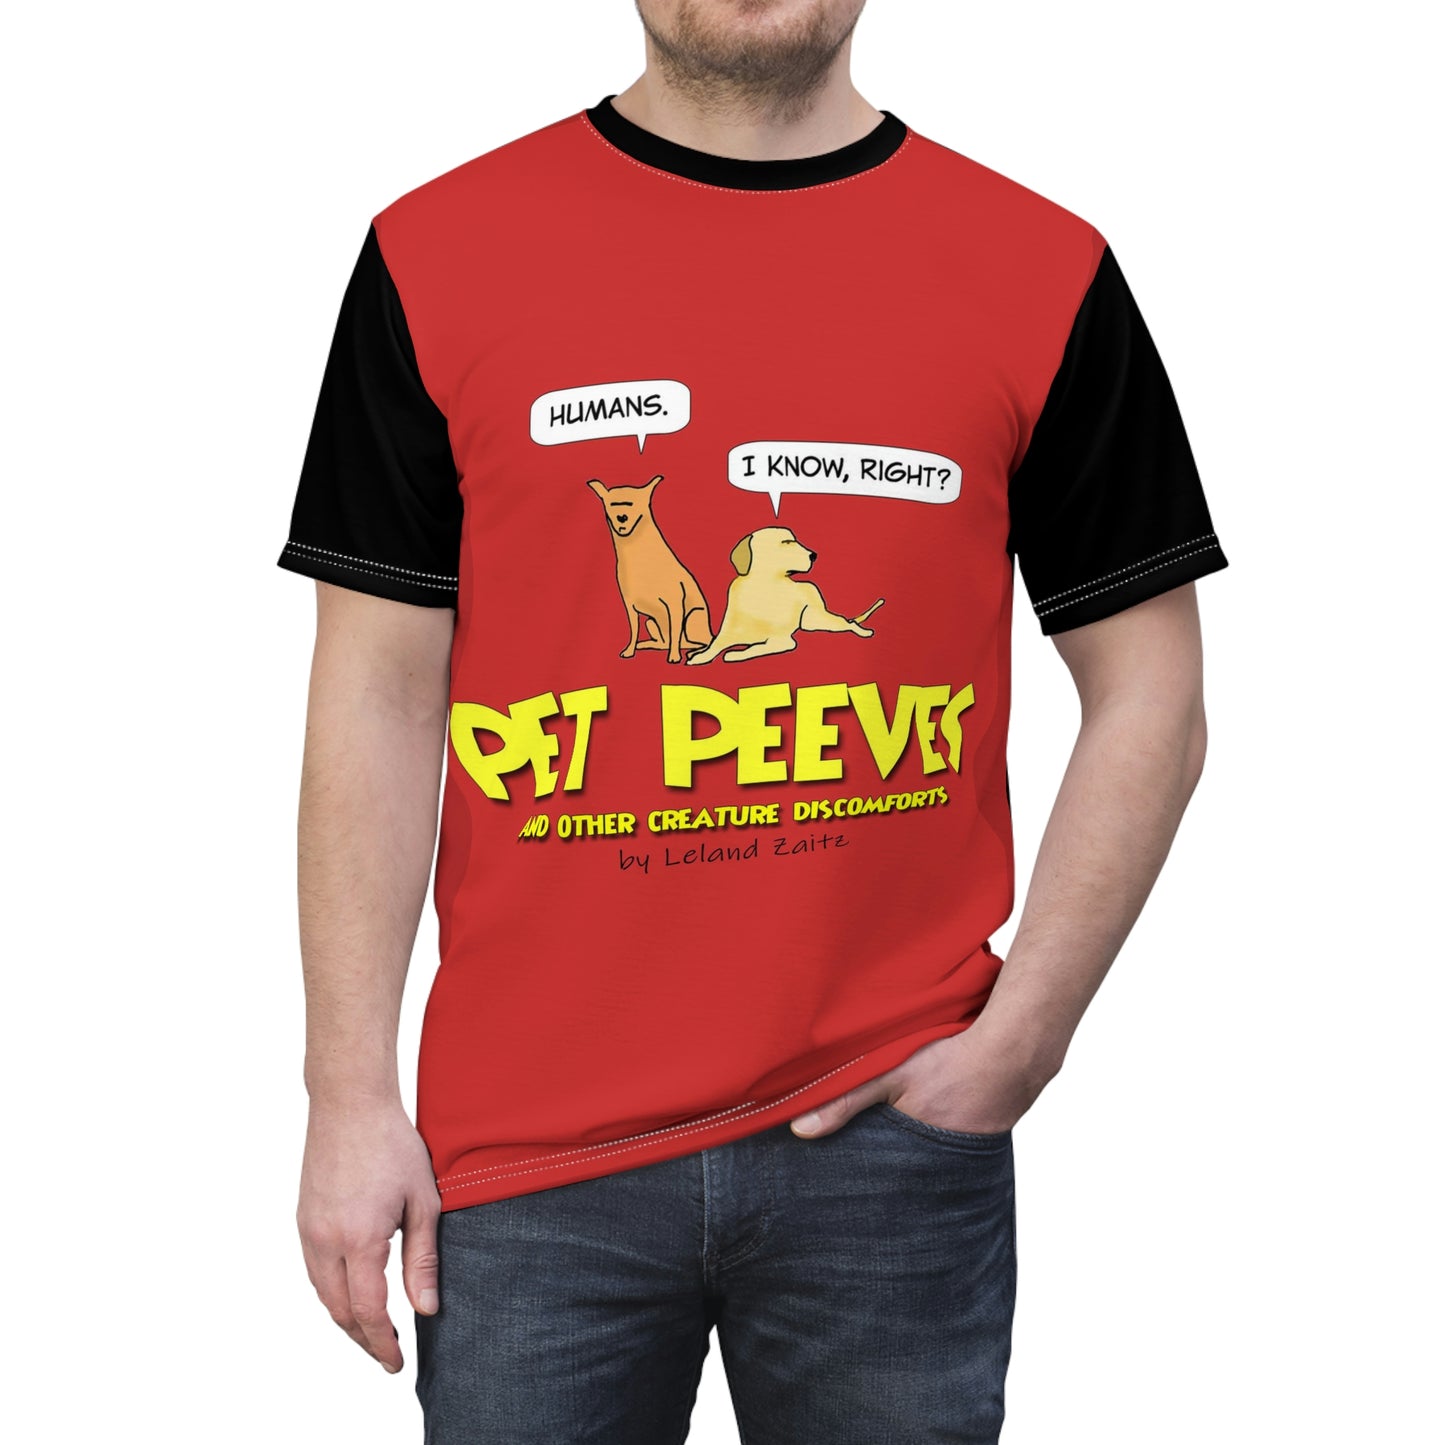 Pet Peeves - Unisex All-Over Print Cut & Sew T-Shirt